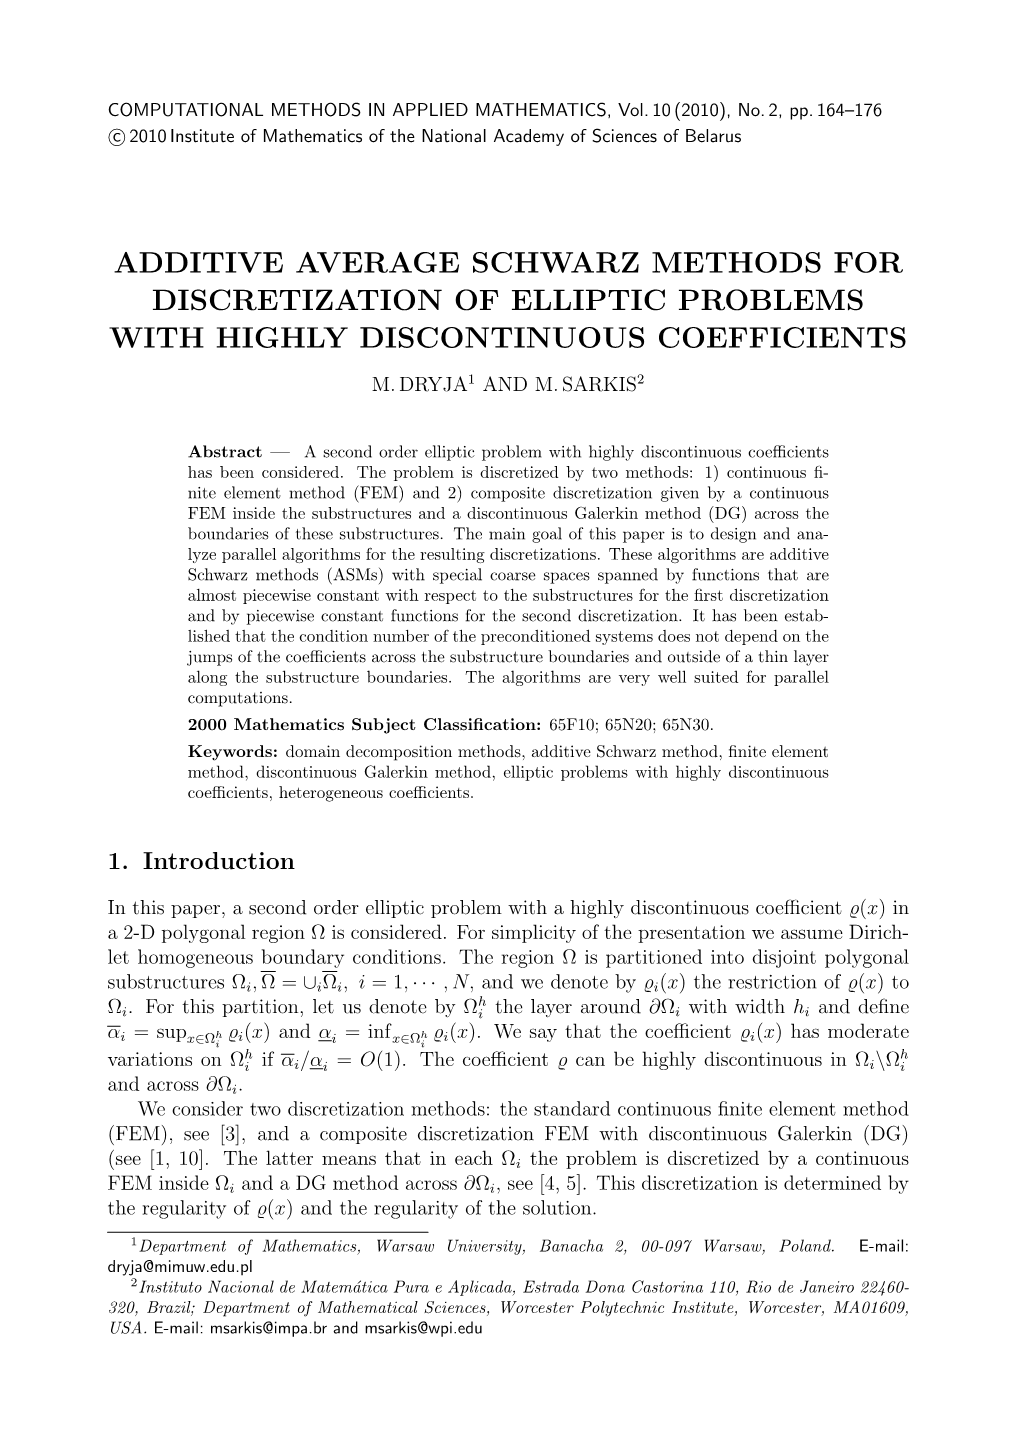 Additive Average Schwarz Methods for Discretization of Elliptic Problems with Highly Discontinuous Coefficients